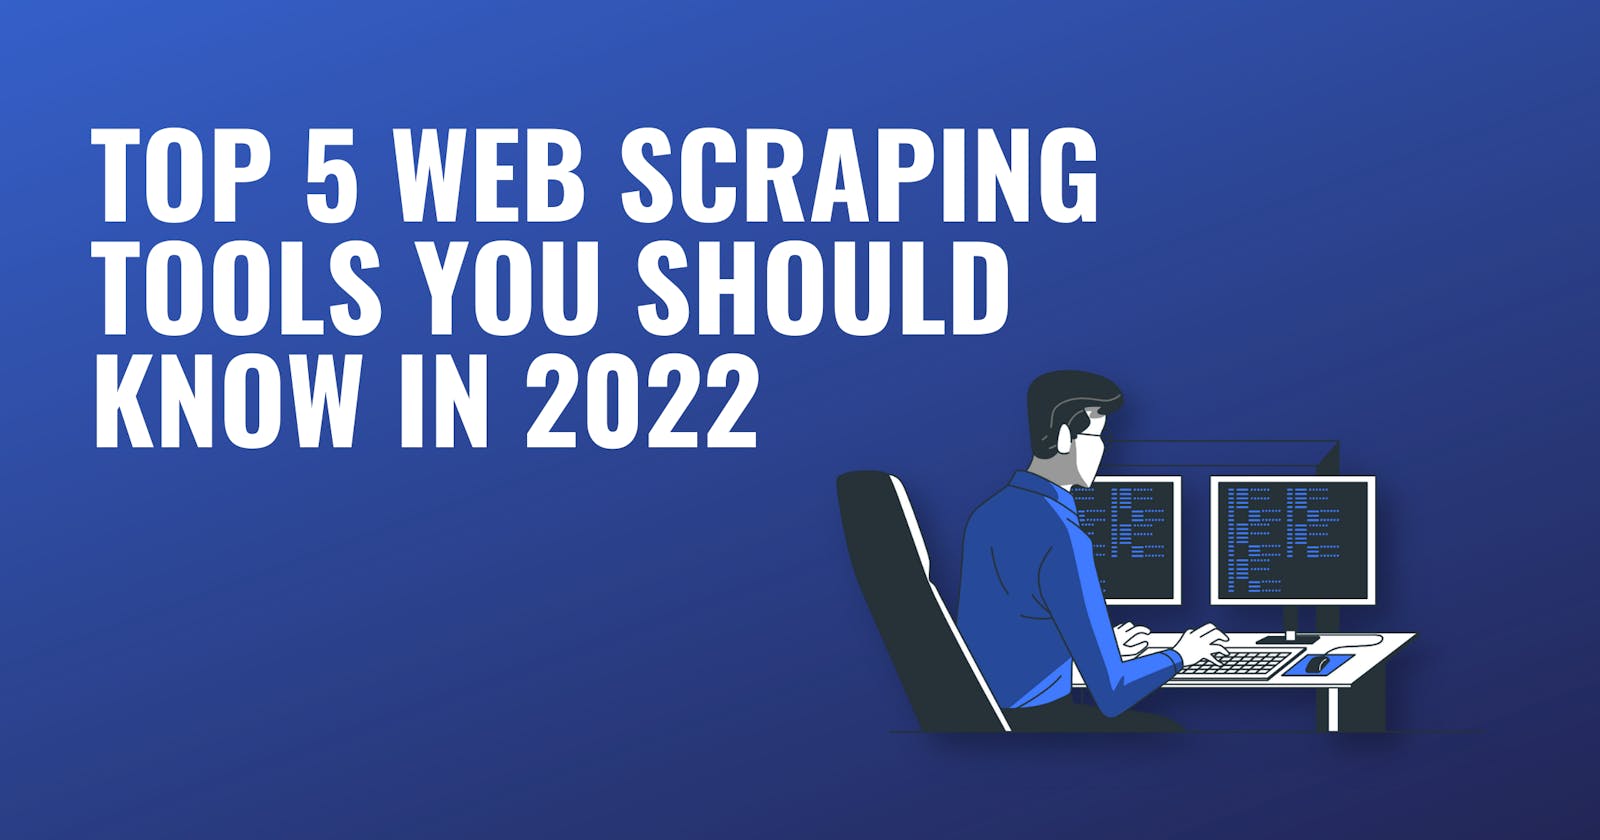 Top 5 web scraping tools you should know in 2022